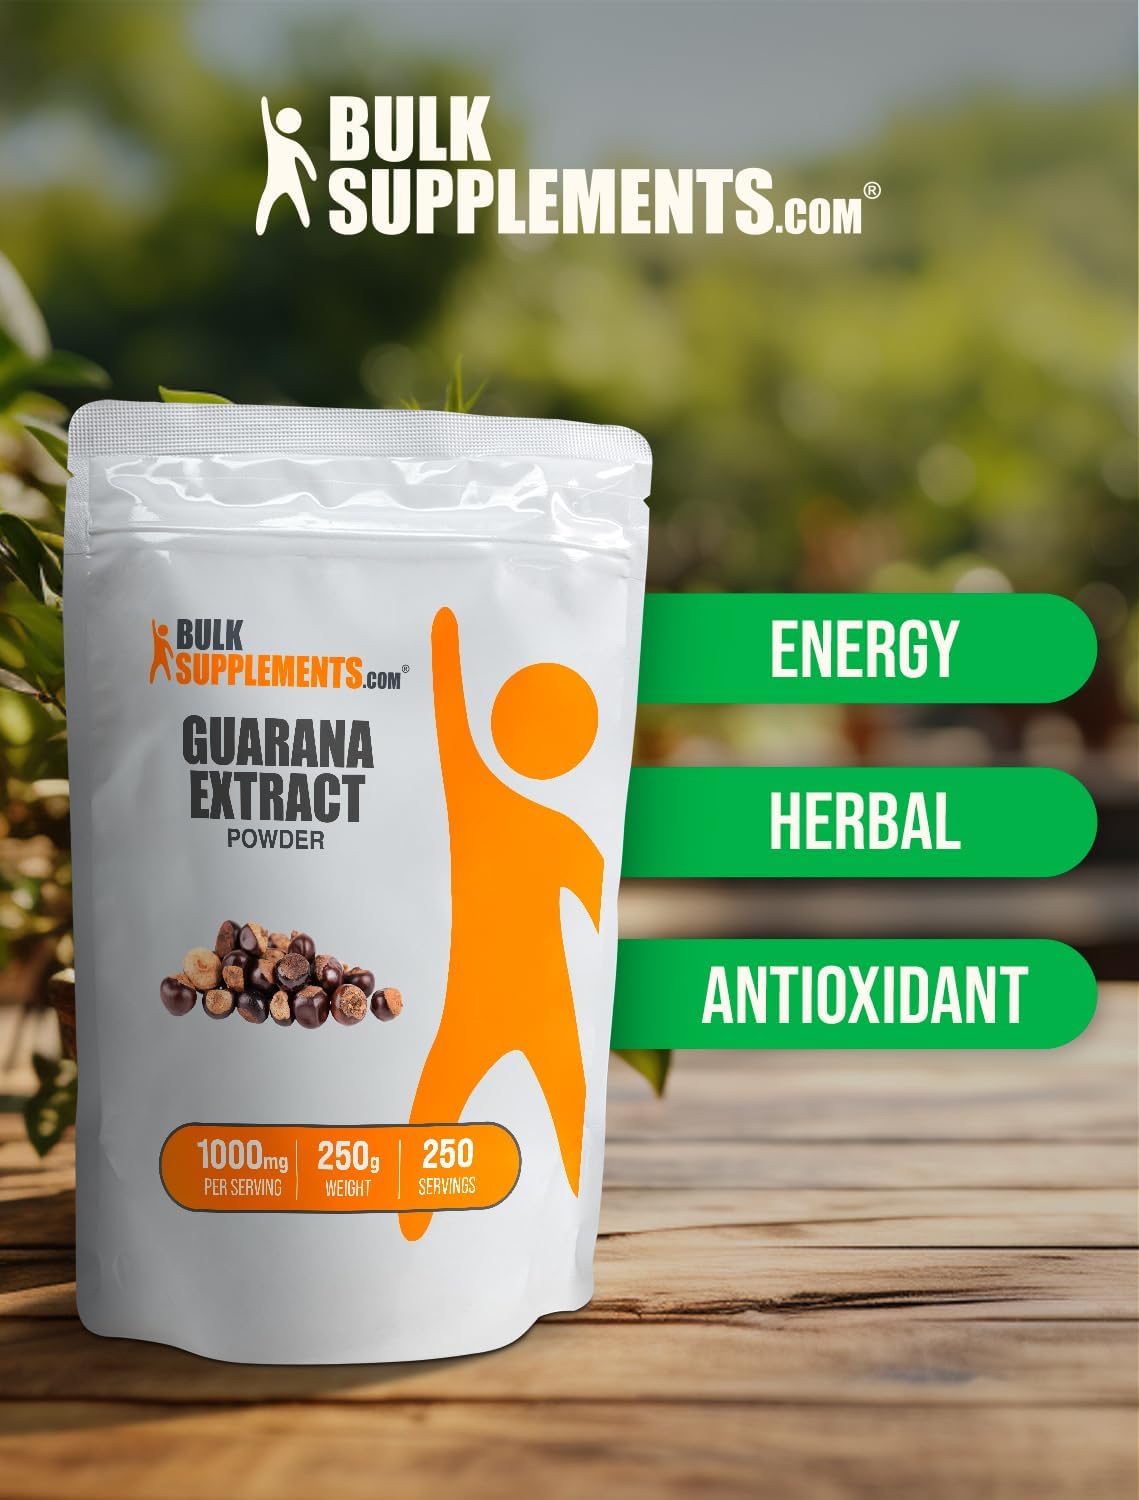 BULKSUPPLEMENTS.COM Guarana Extract Powder - Natural Caffeine Supplements for Energy Support - Gluten Free - 1000mg per Serving, 250 Servings (250 Grams - 8.8 oz) : Health & Household